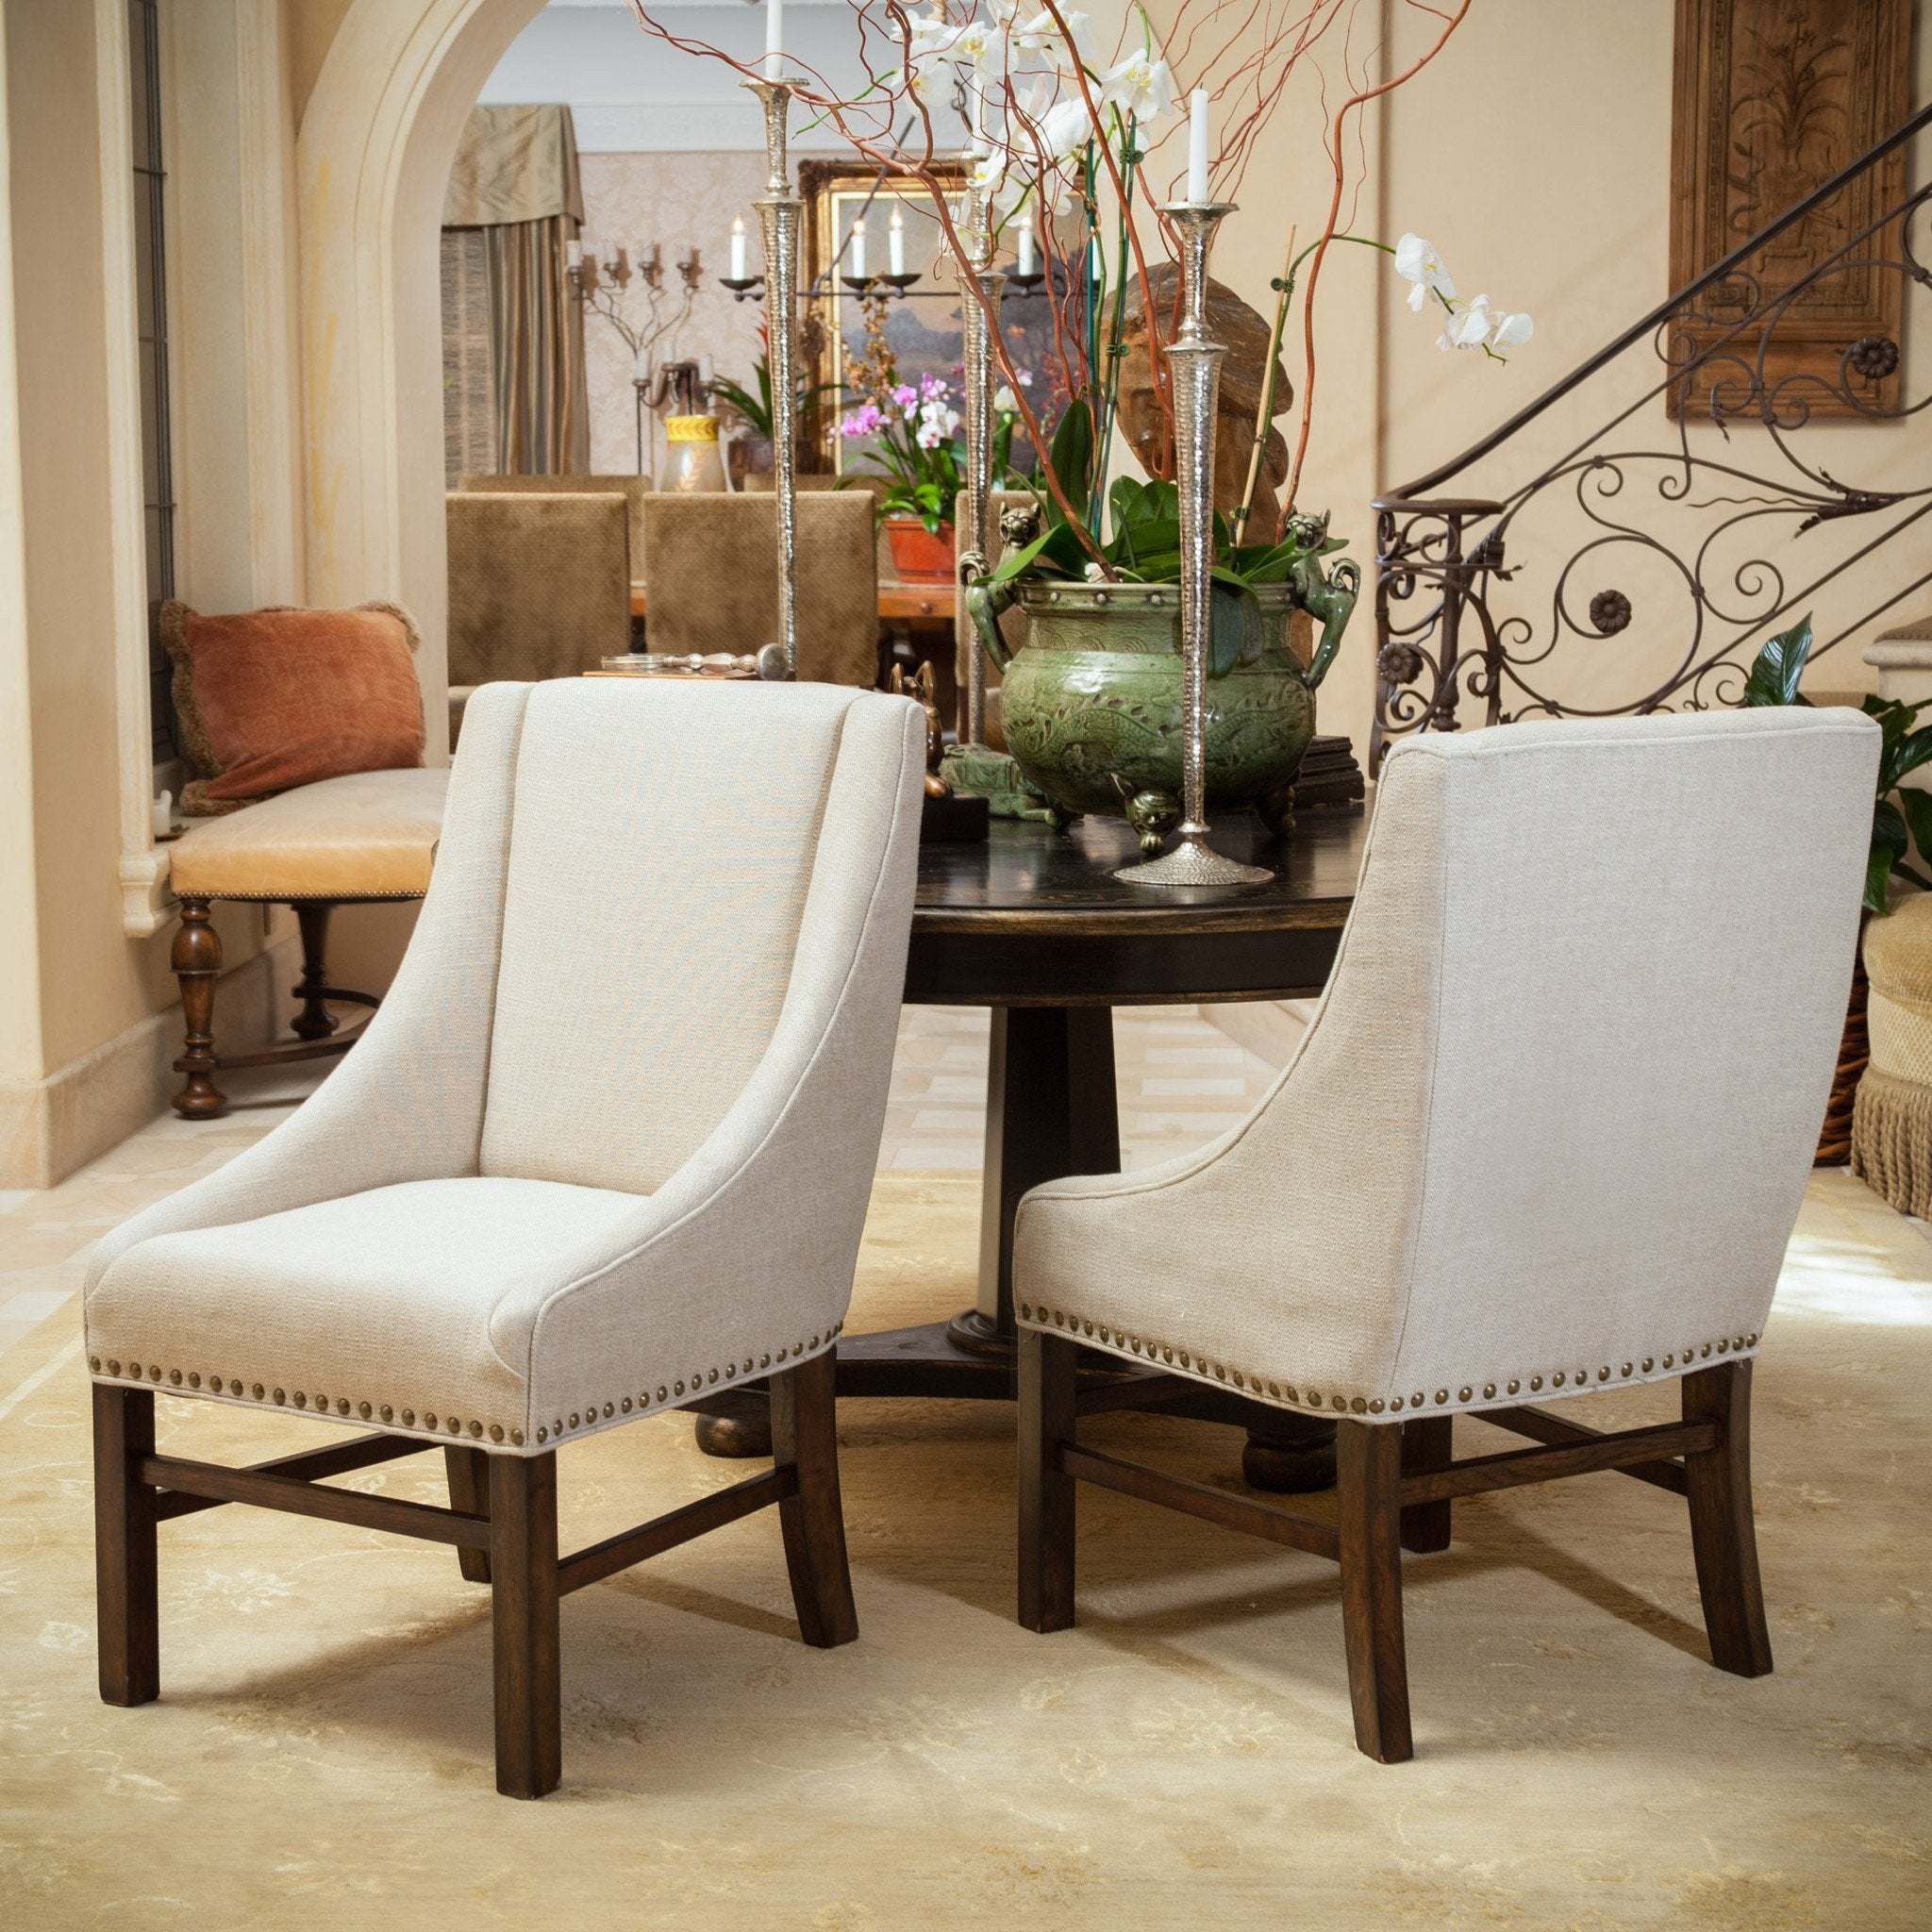 Fabric Upholstered Dining Chairs Set Of 2 Nh773592 Noble House Furniture